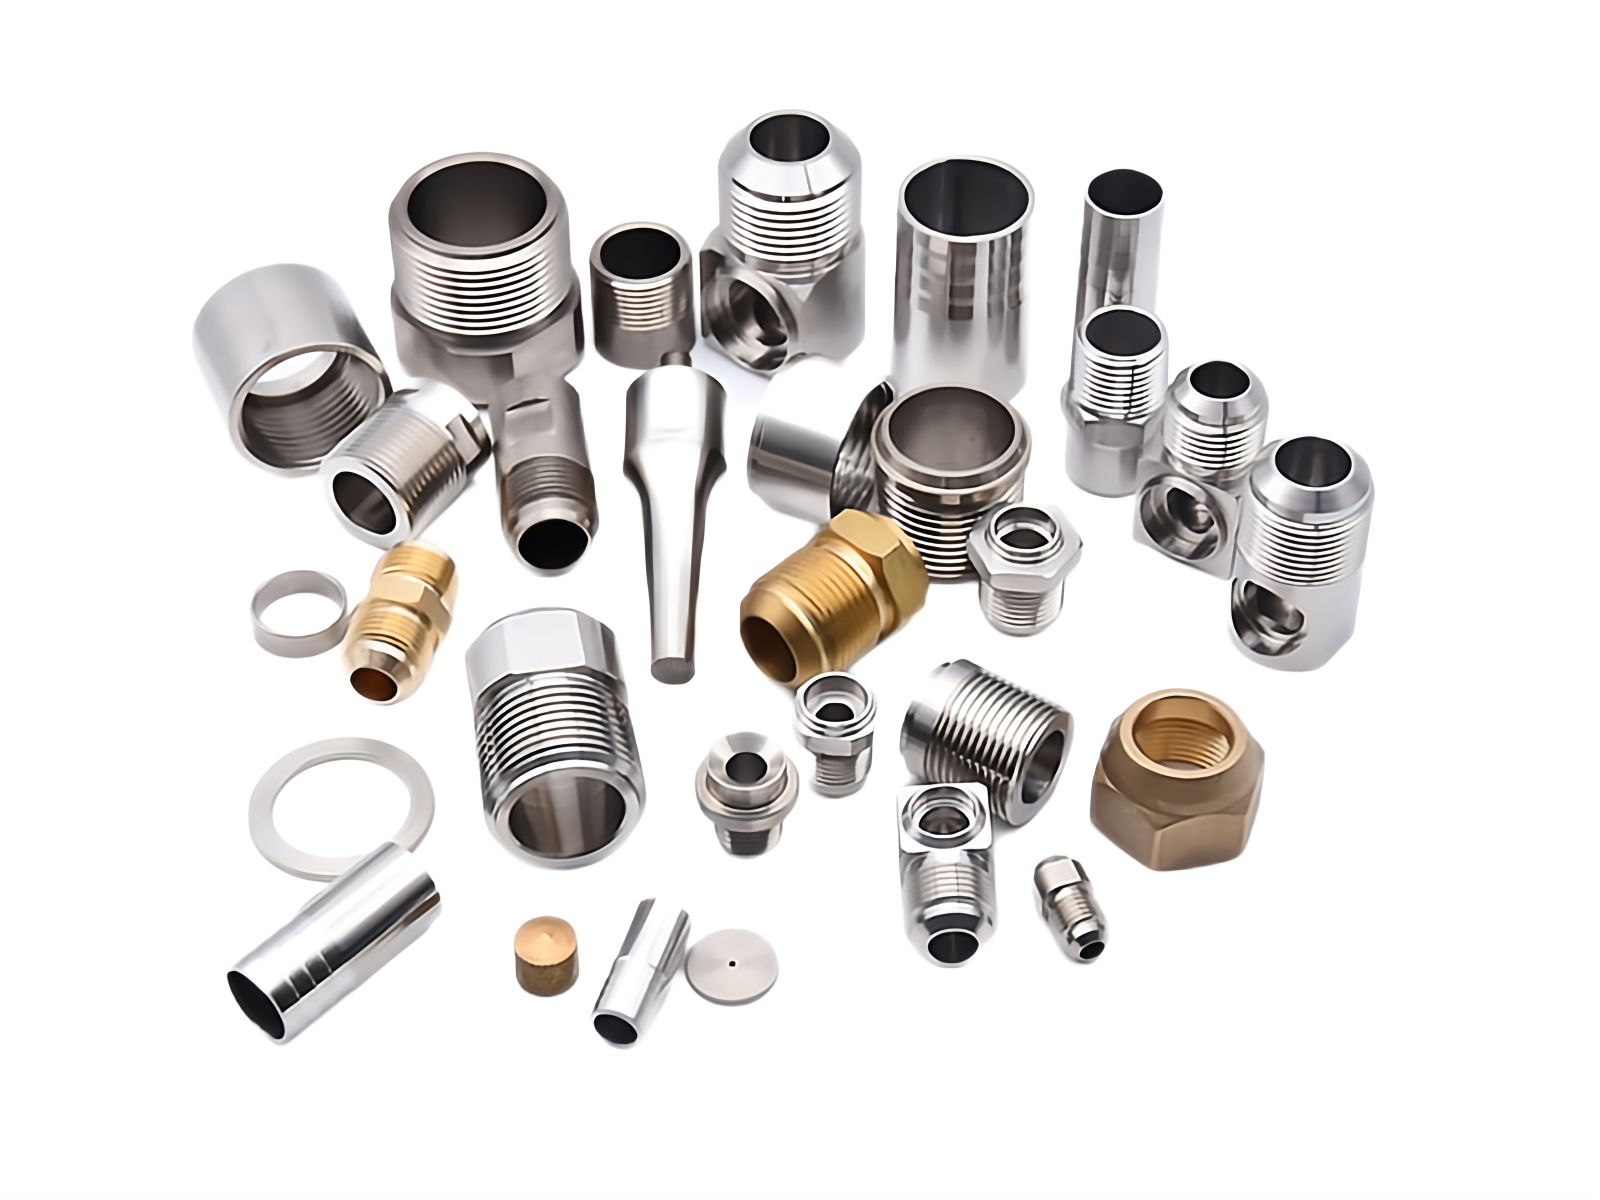 CNC Processing fittings